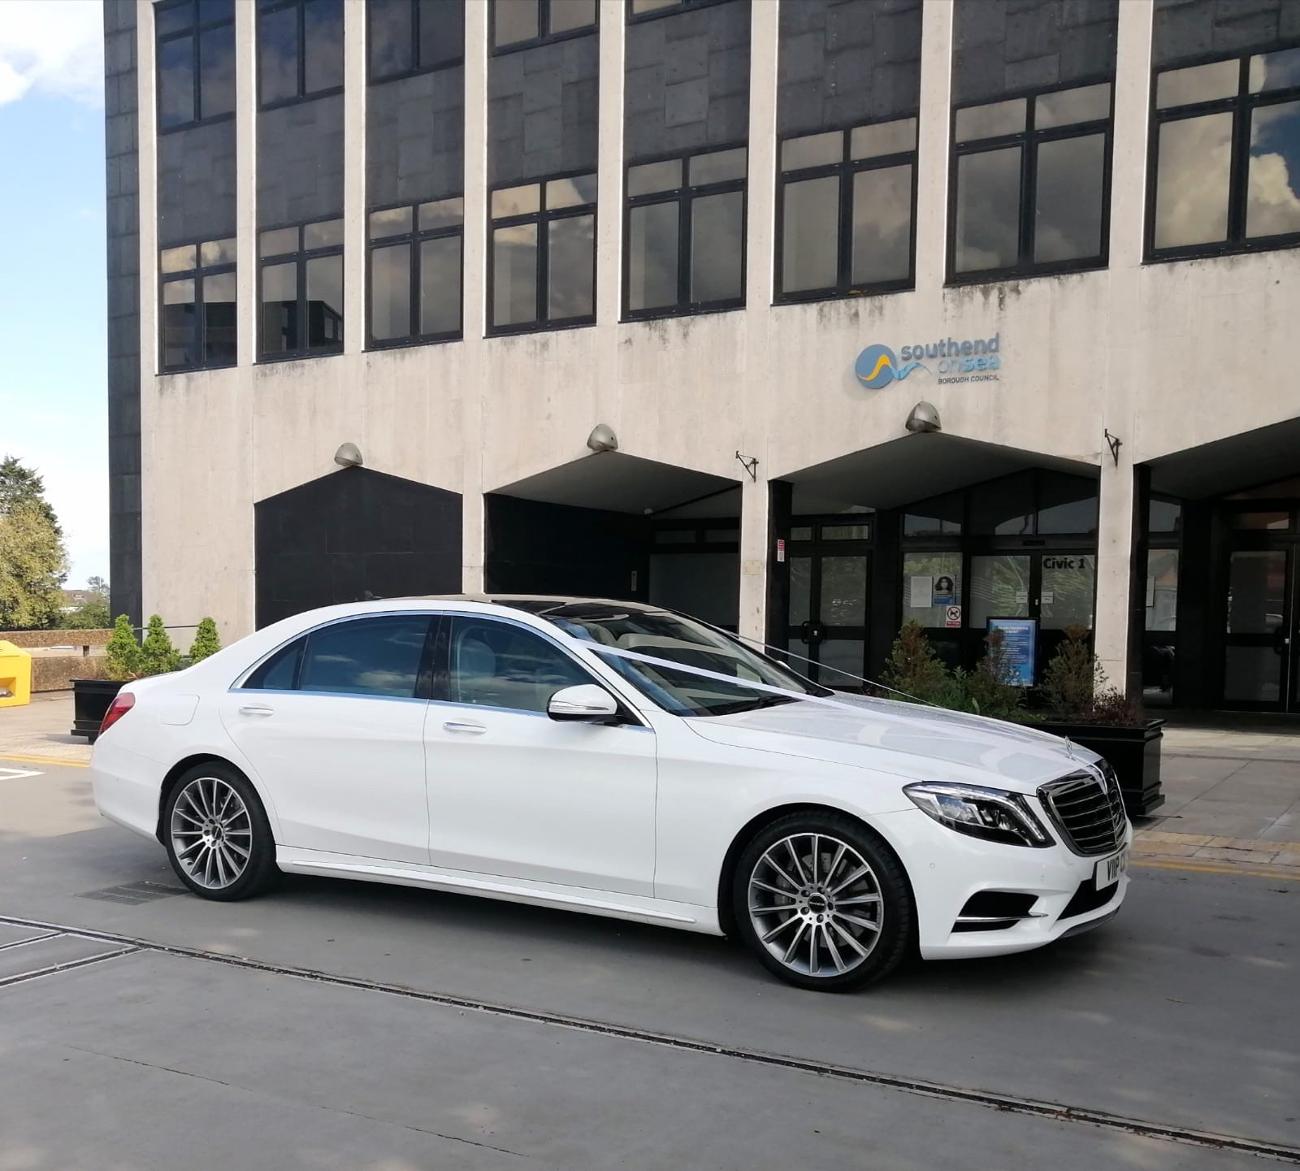 Wedding Cars Hire Essex from £150 | Wedding Car Hire Essex gallery image 1